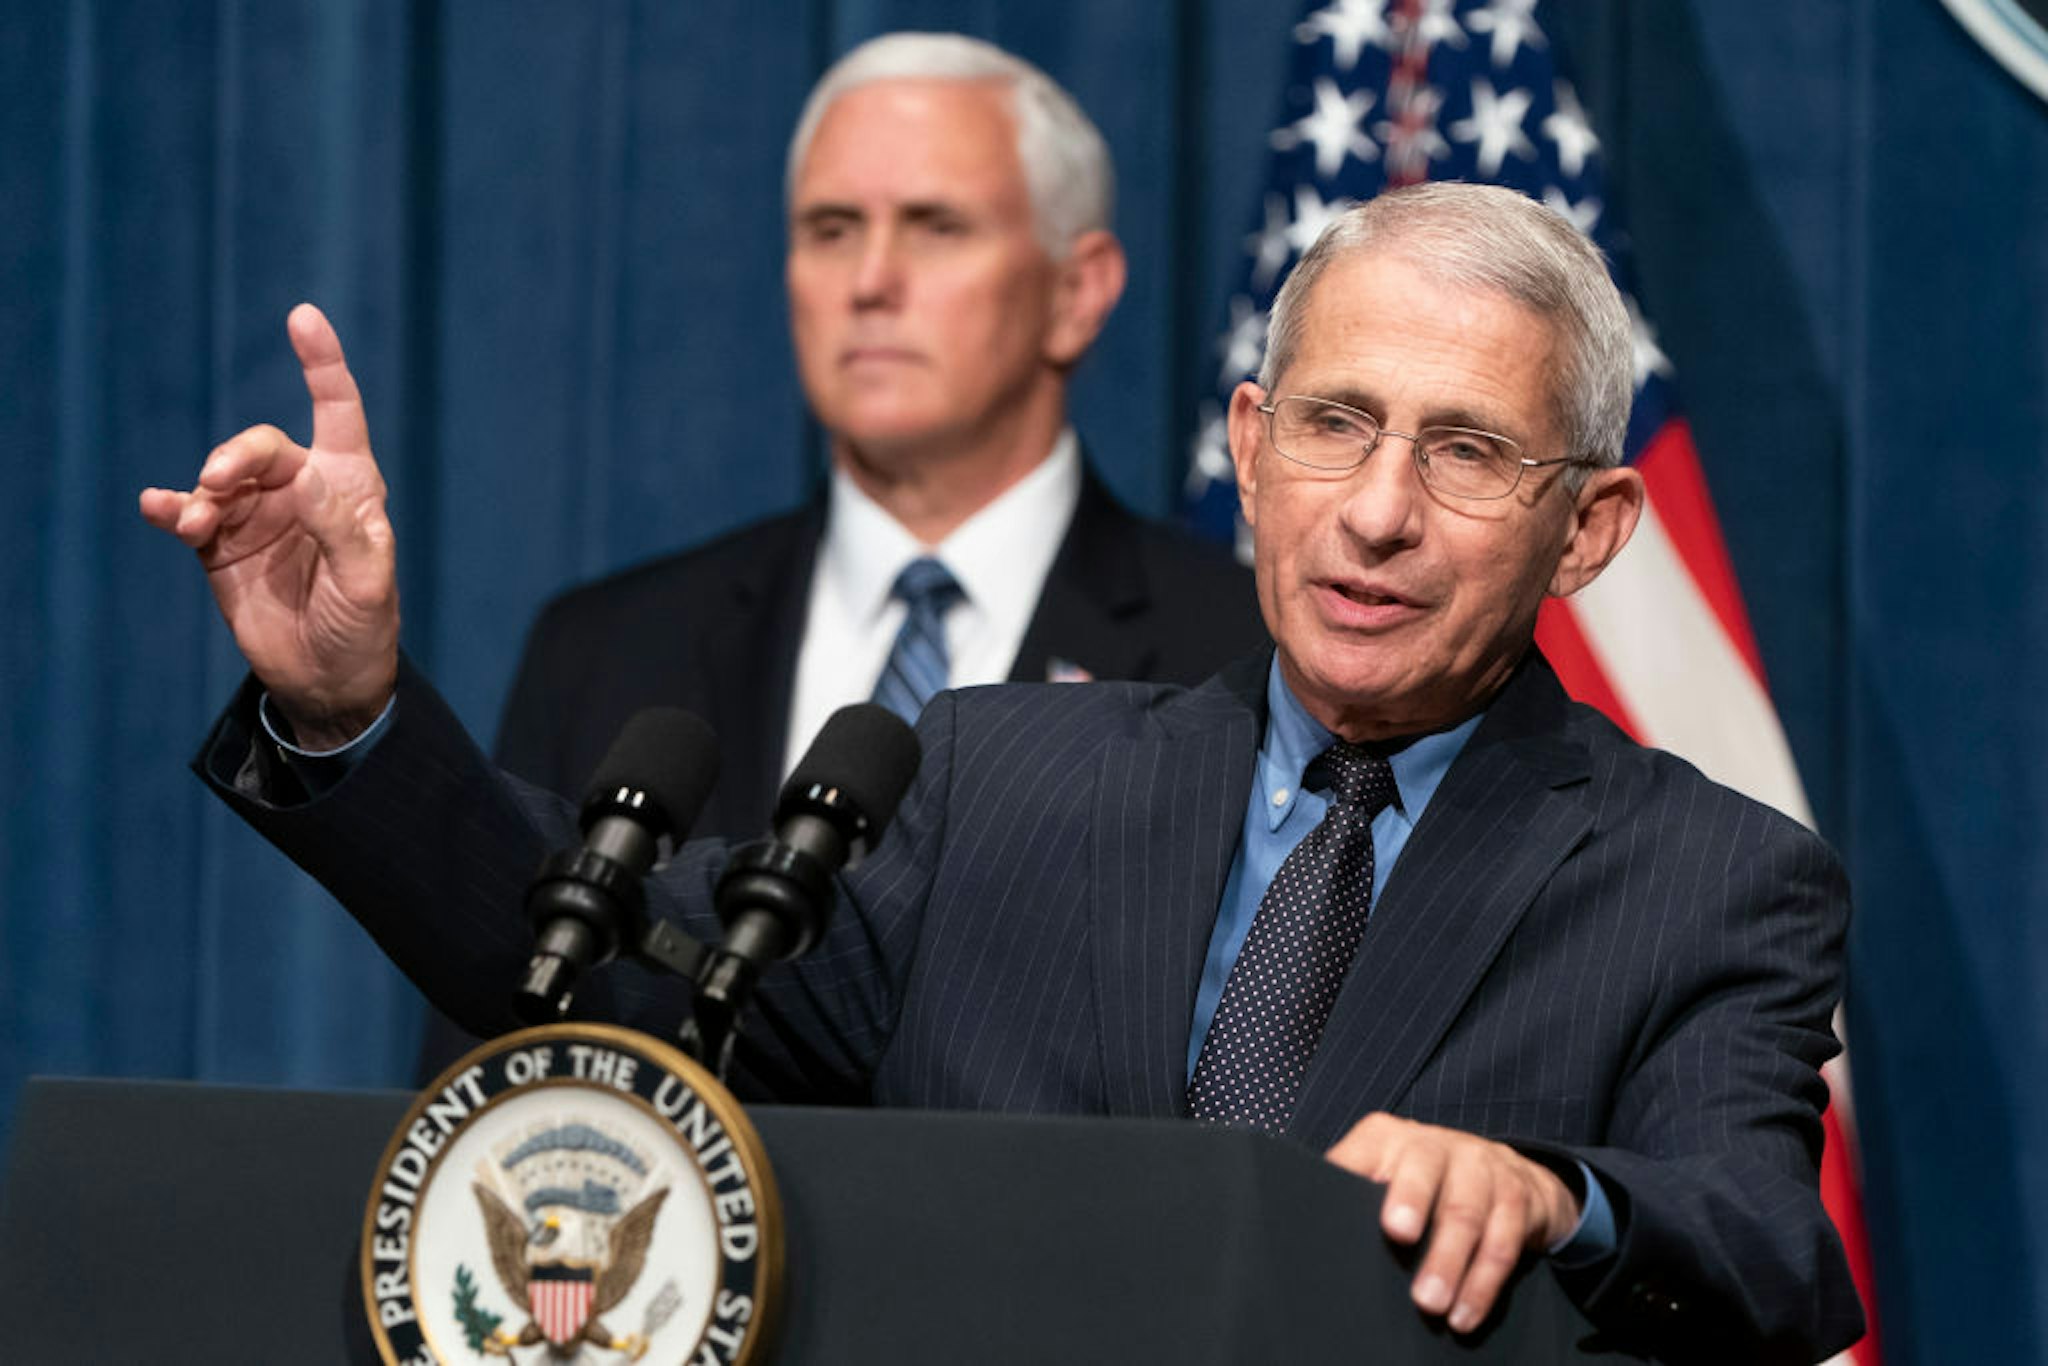 WASHINGTON, DC - JUNE 26: Director of the National Institute of Allergy and Infectious Diseases Anthony Fauci speaks as U.S. Vice President Mike Pence listens after a White House Coronavirus Task Force briefing at the Department of Health and Human Services on June 26, 2020 in Washington, DC. Cases of coronavirus disease (COVID-19) are rising in southern and western states forcing businesses to remain closed. (Photo by Joshua Roberts/Getty Images)